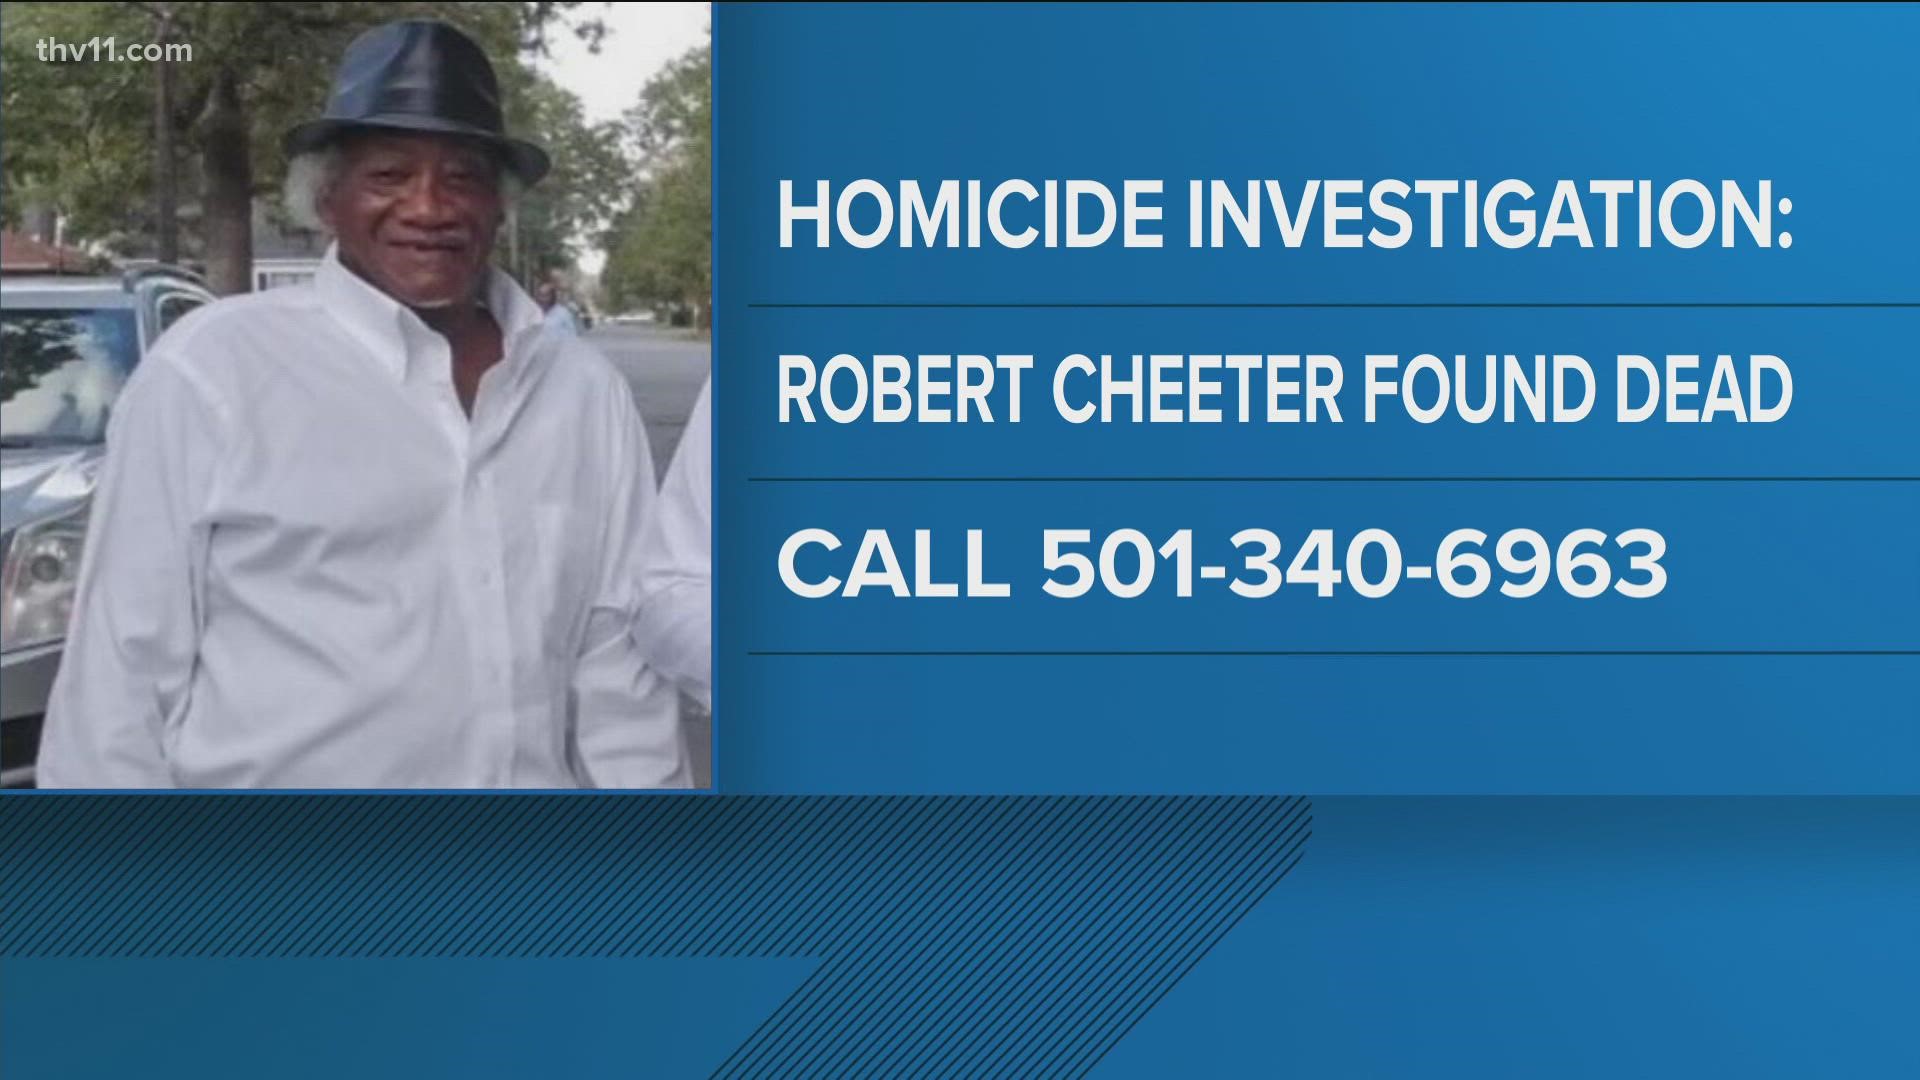 Police are asking for help in searching for a suspect in connection to the Frazier Pike homicide, which took the life of 67-year-old Robert Cheeter.